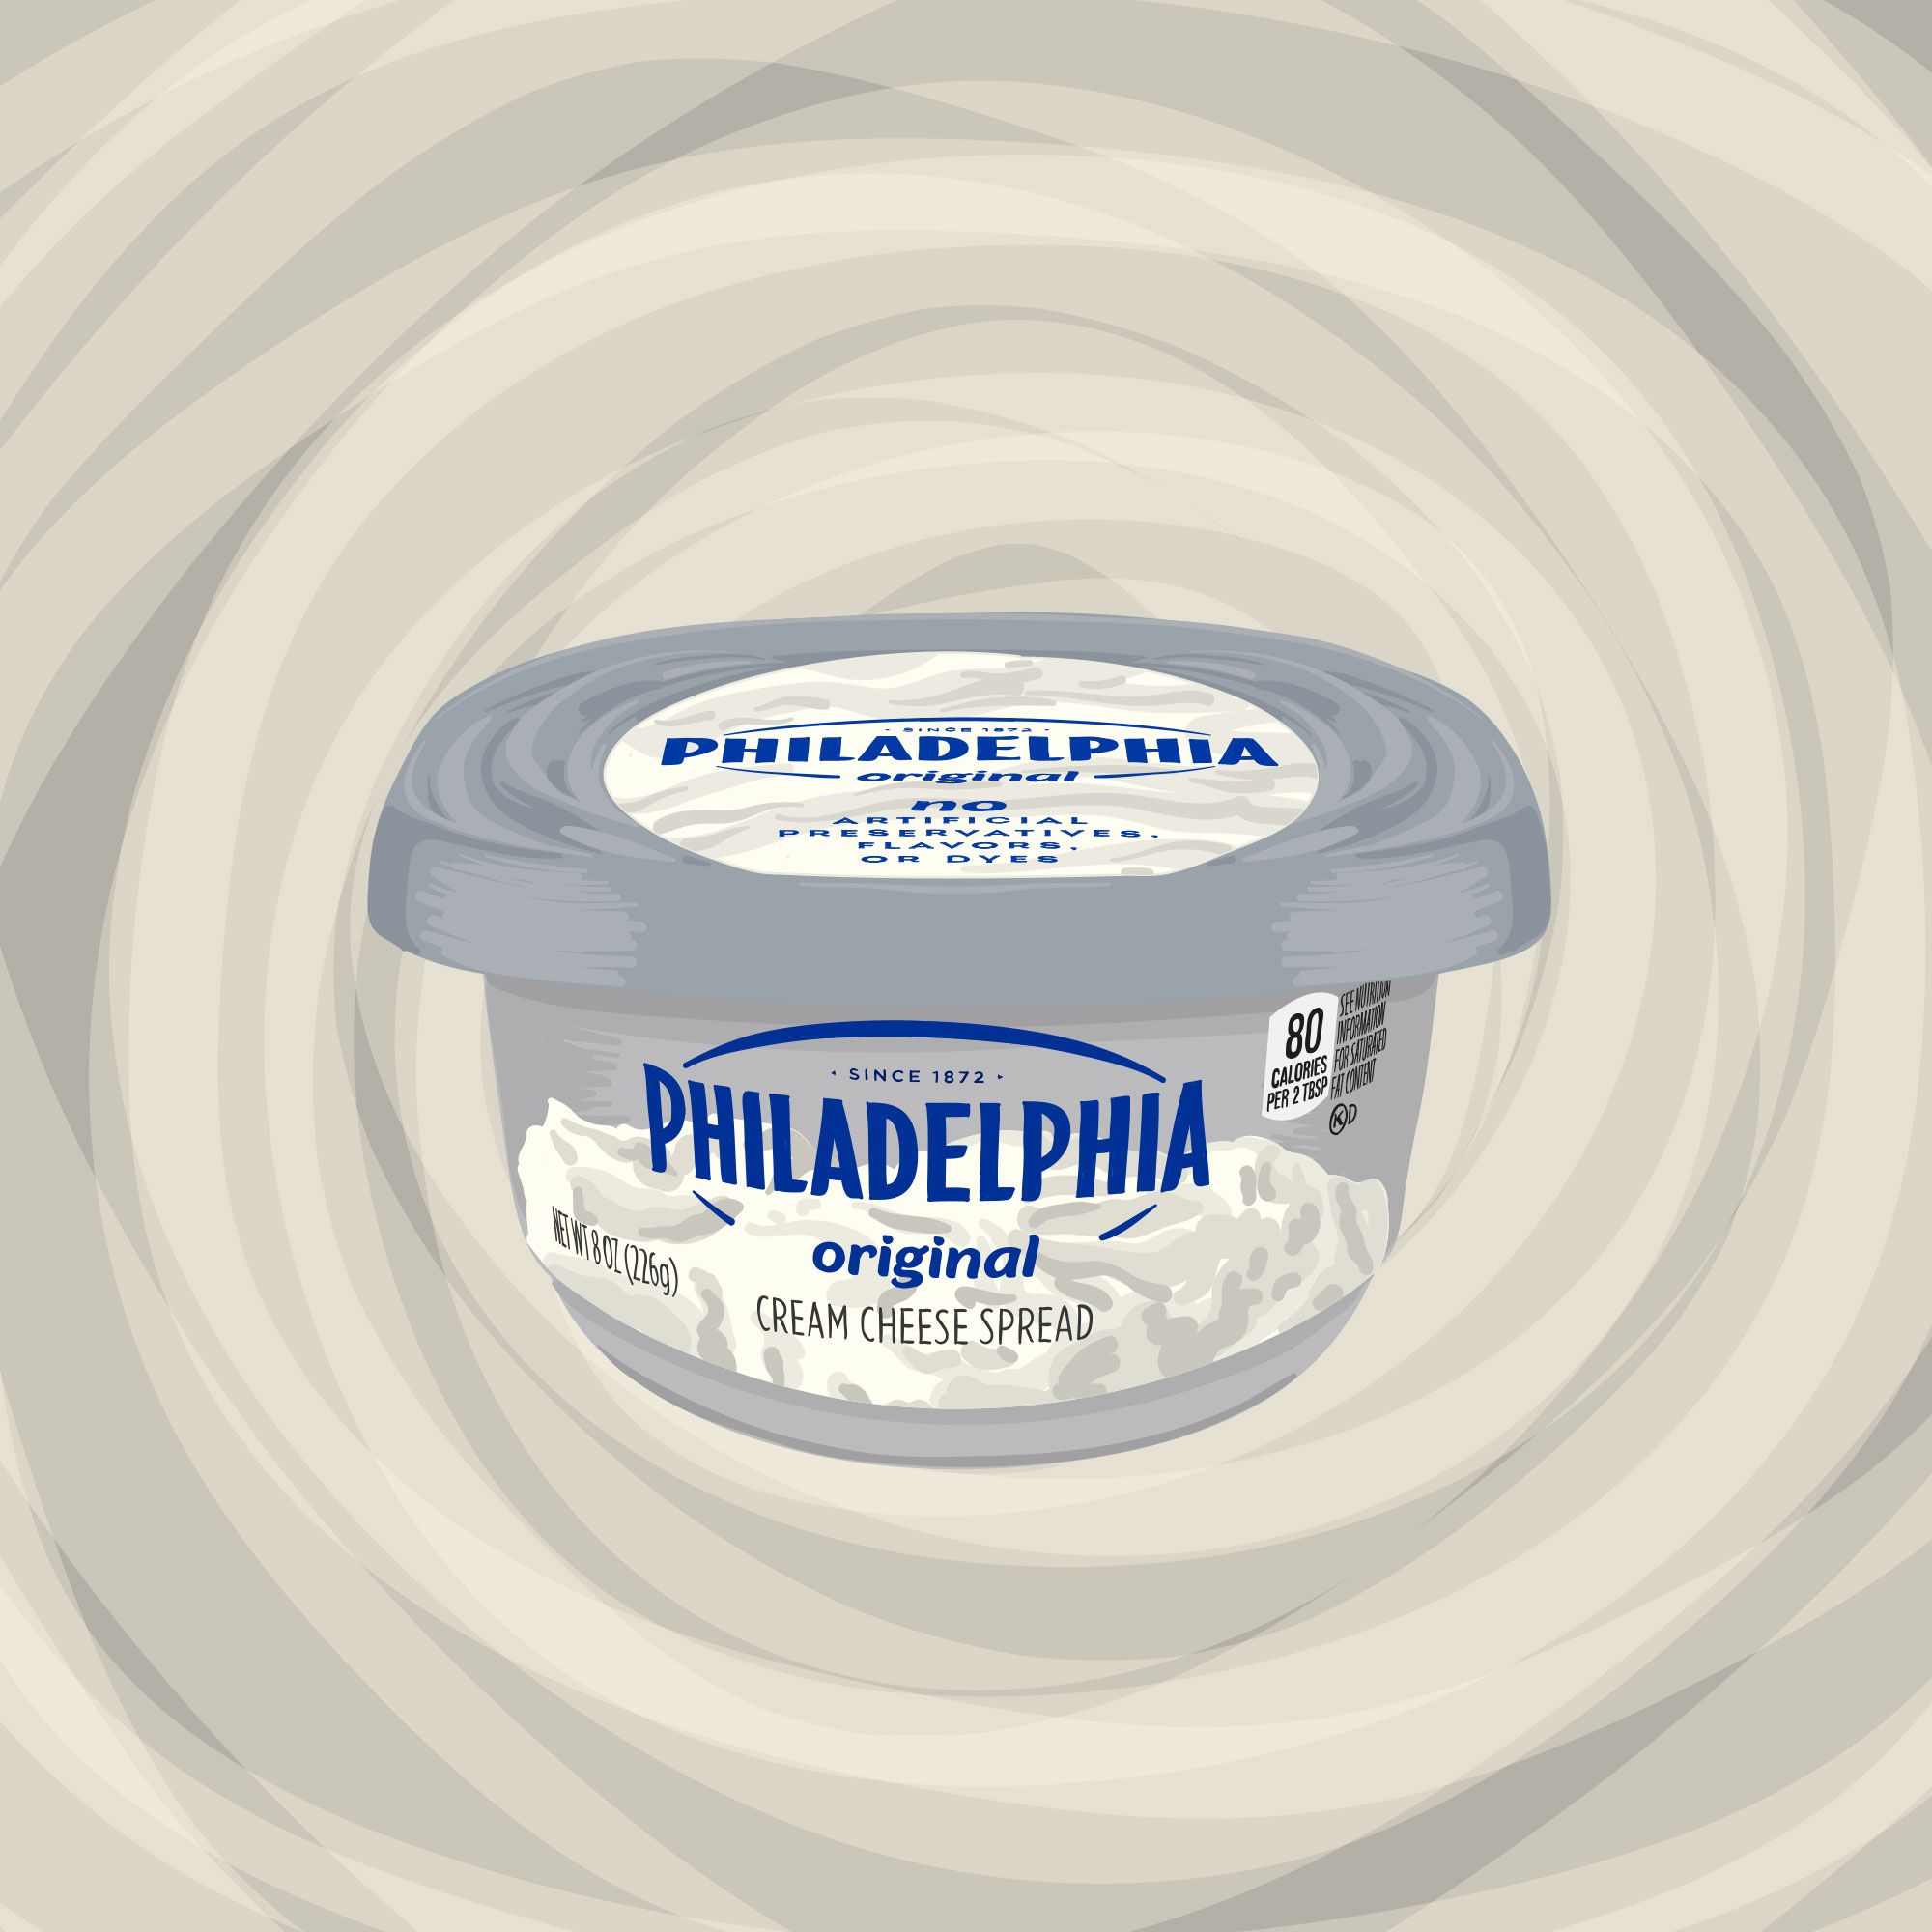 Get To Know Our Favorite Cream Cheese